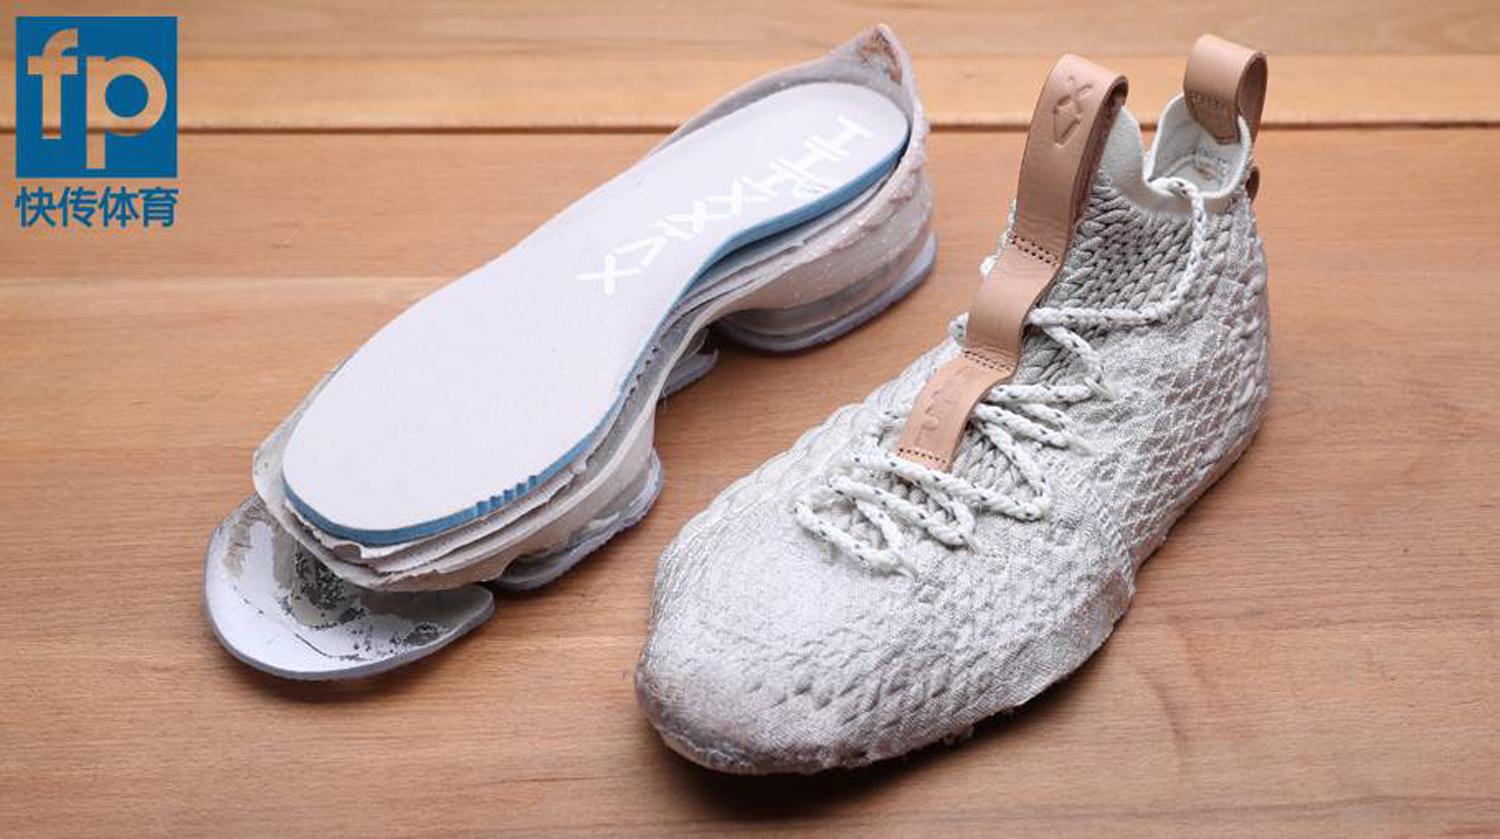 lebron 15 low deconstructed